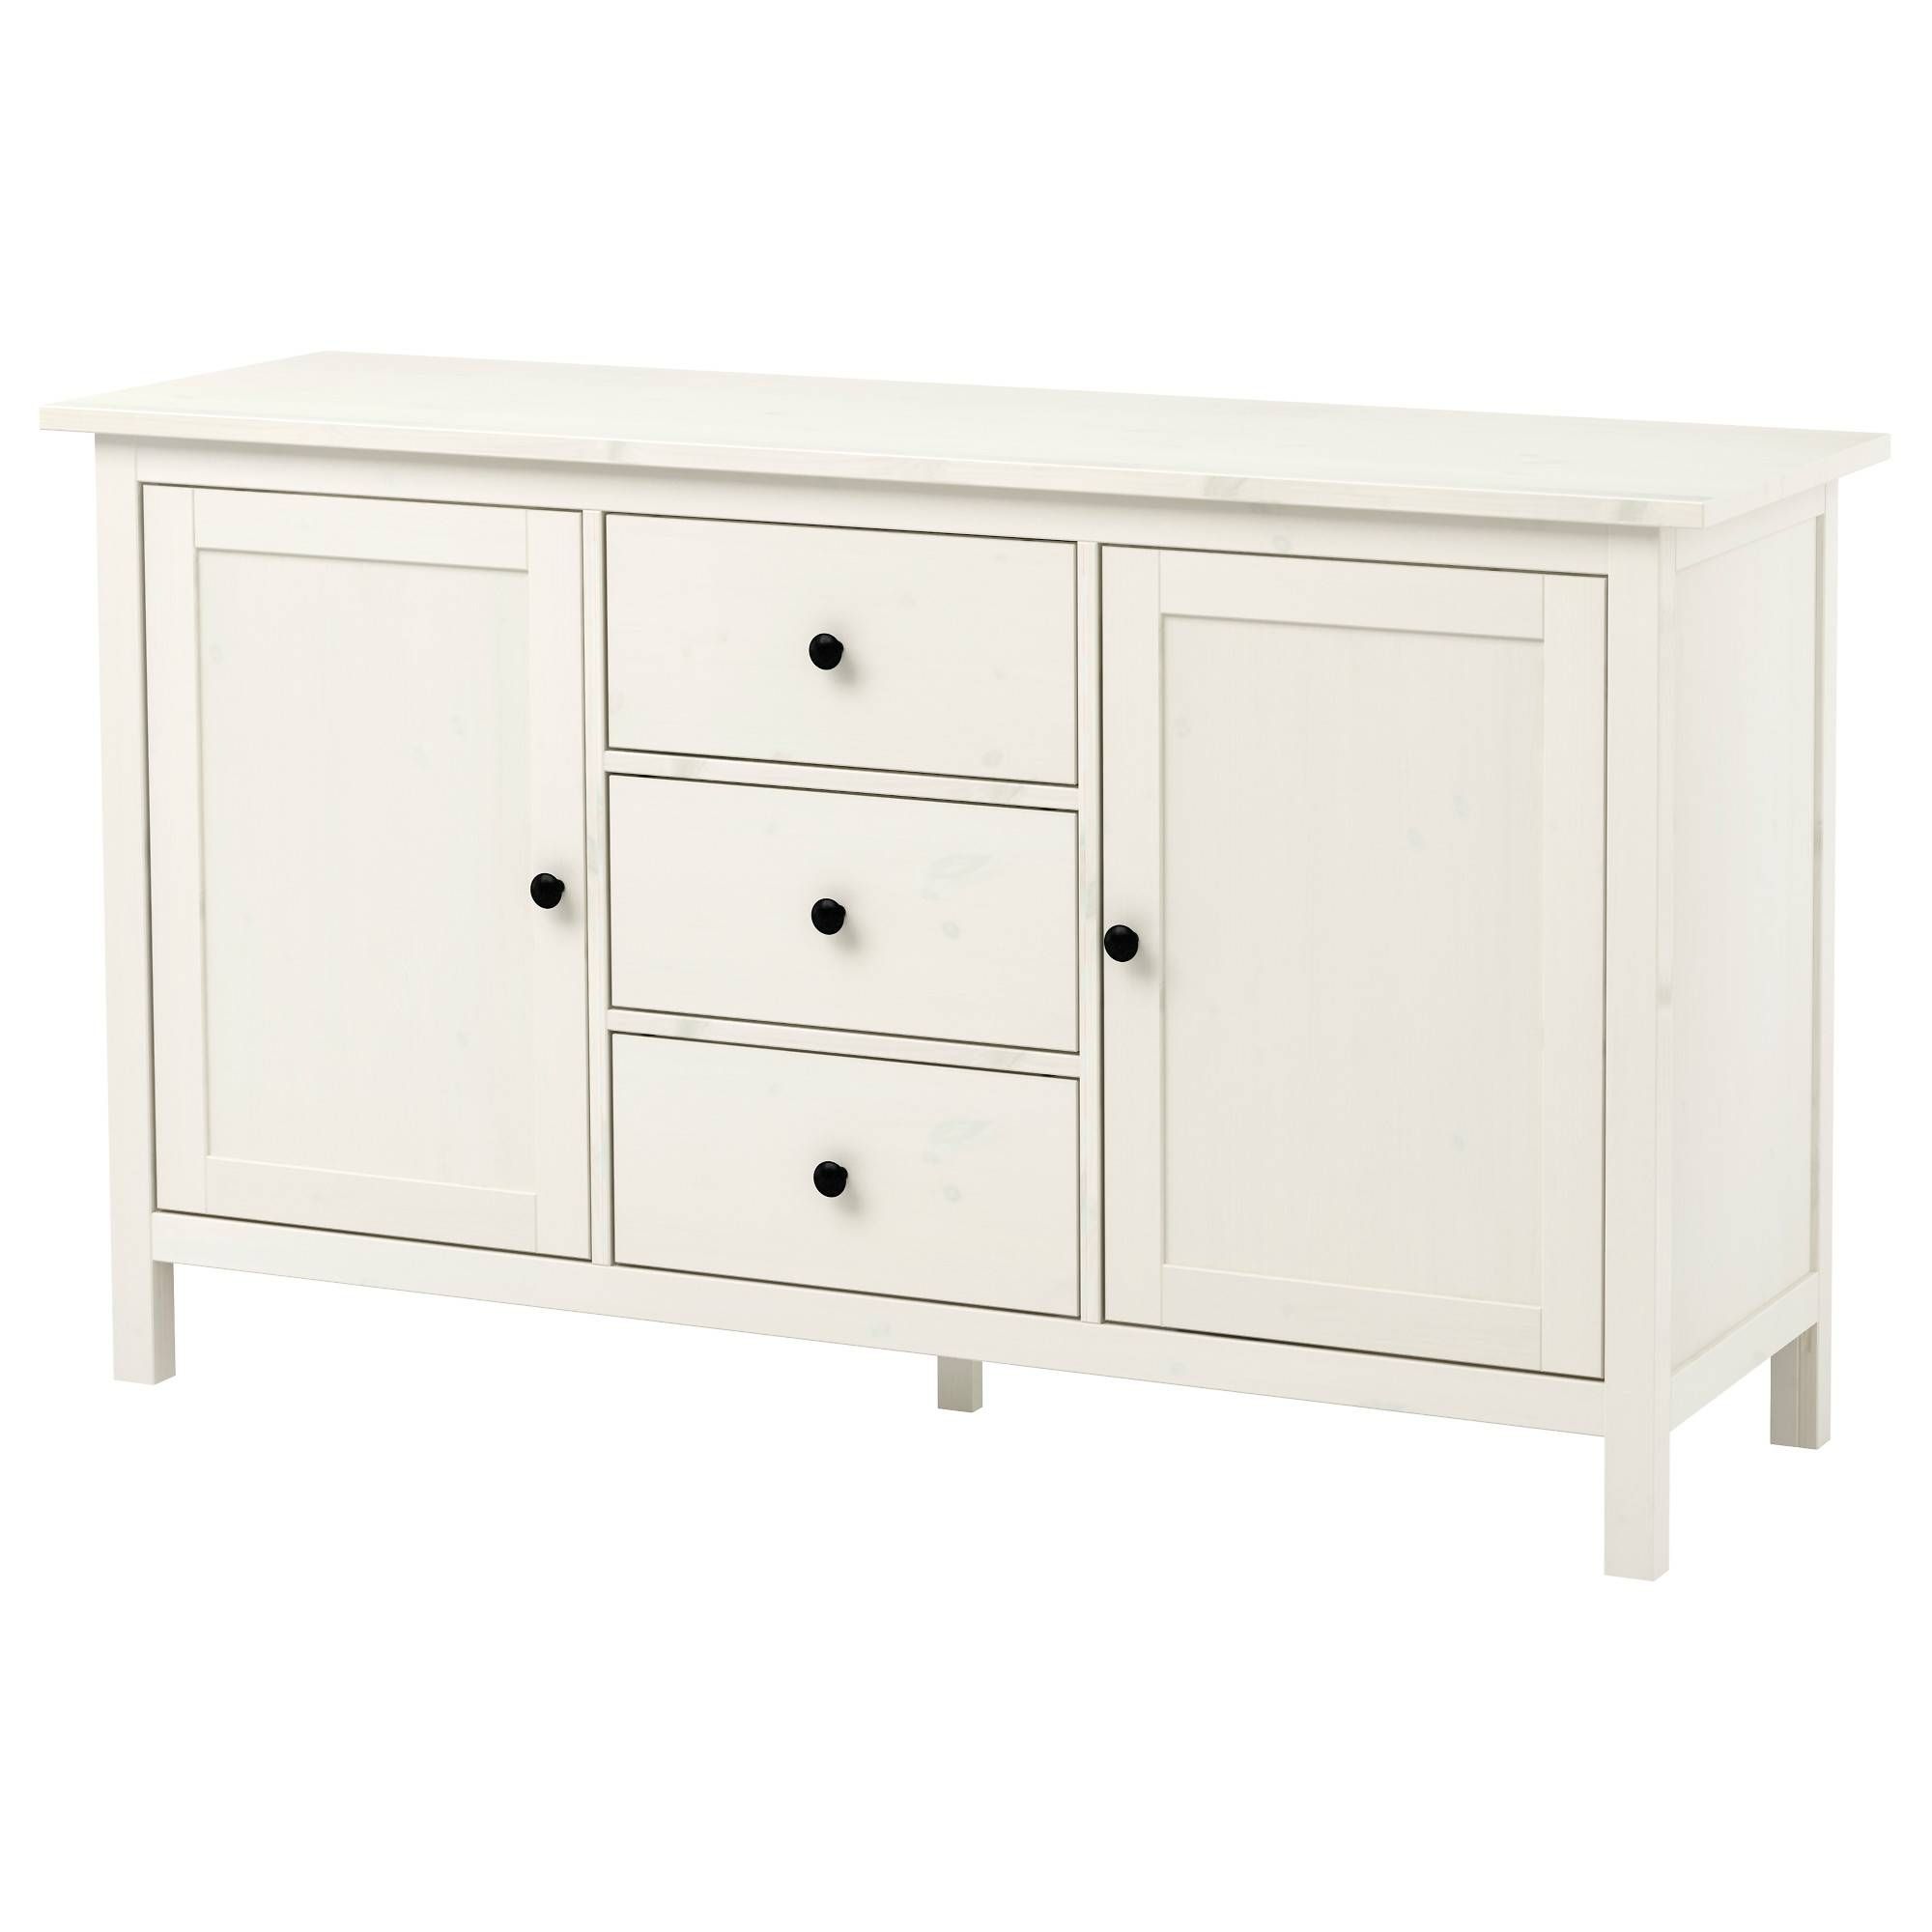 Buffet Tables & Sideboards – Ikea With Regard To Small Sideboards For Sale (View 12 of 20)